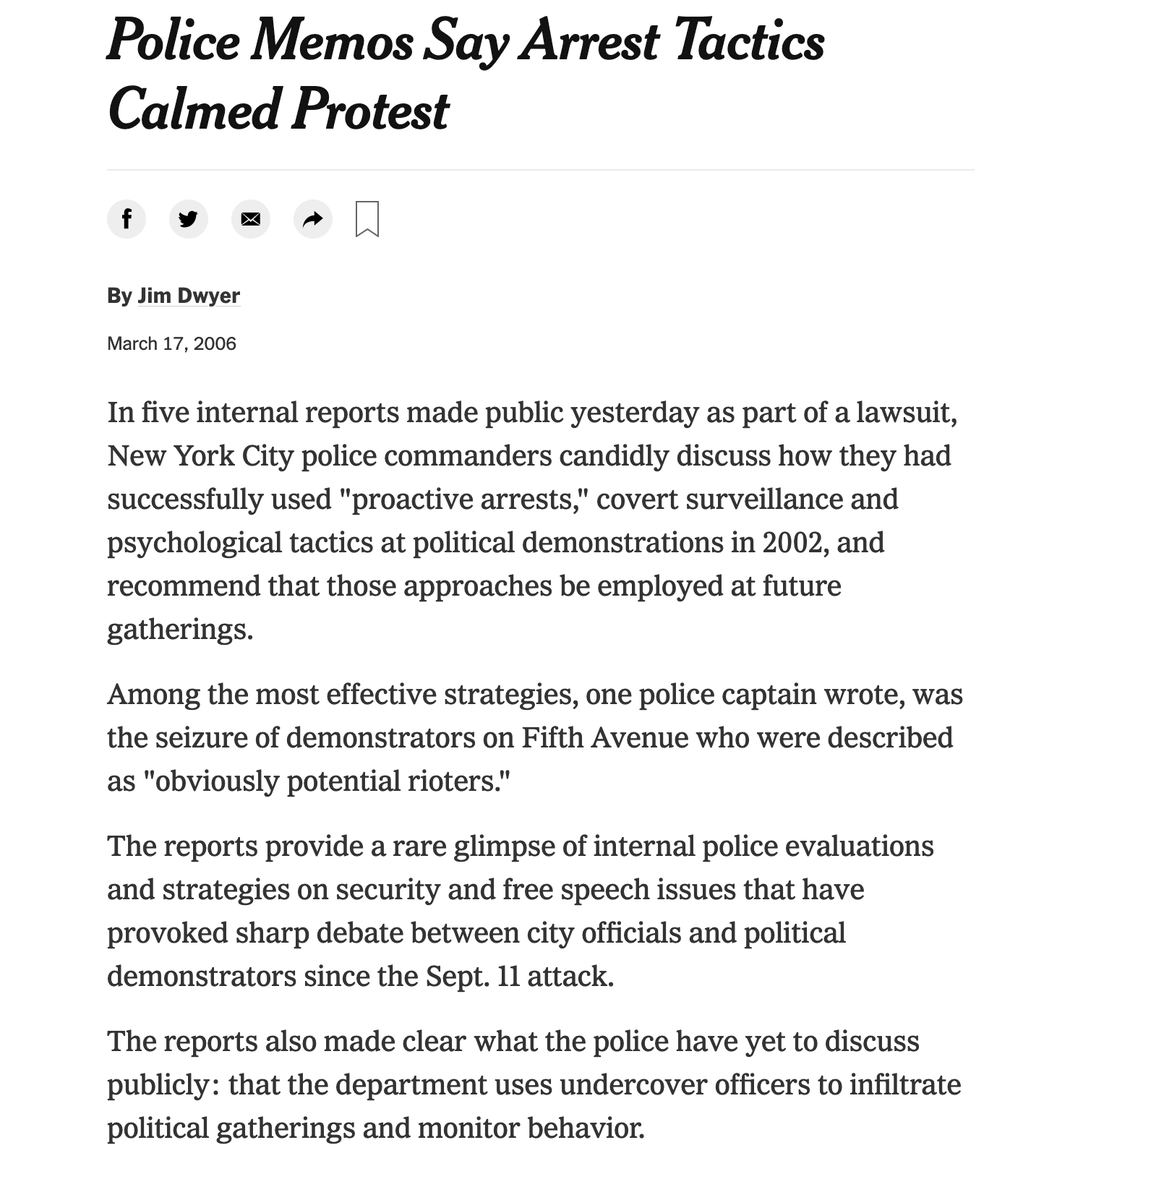 Notable, the NYPD's 2002 WEF policing was enormously problematic and involved some of the same violent and repressive NYPD responses to protests that persist - often in modified form - to this day...See, for example, this 2006  @jimdwyernyt article: https://www.nytimes.com/2006/03/17/nyregion/police-memos-say-arrest-tactics-calmed-protest.html